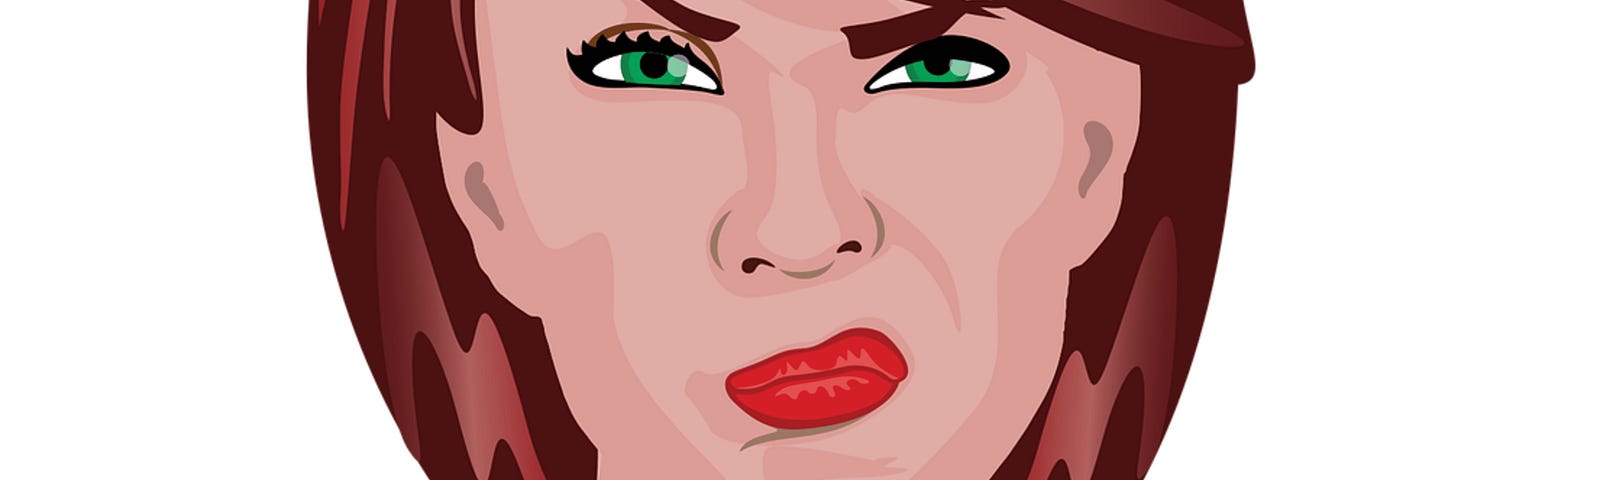 Cartoon caricature of angry woman